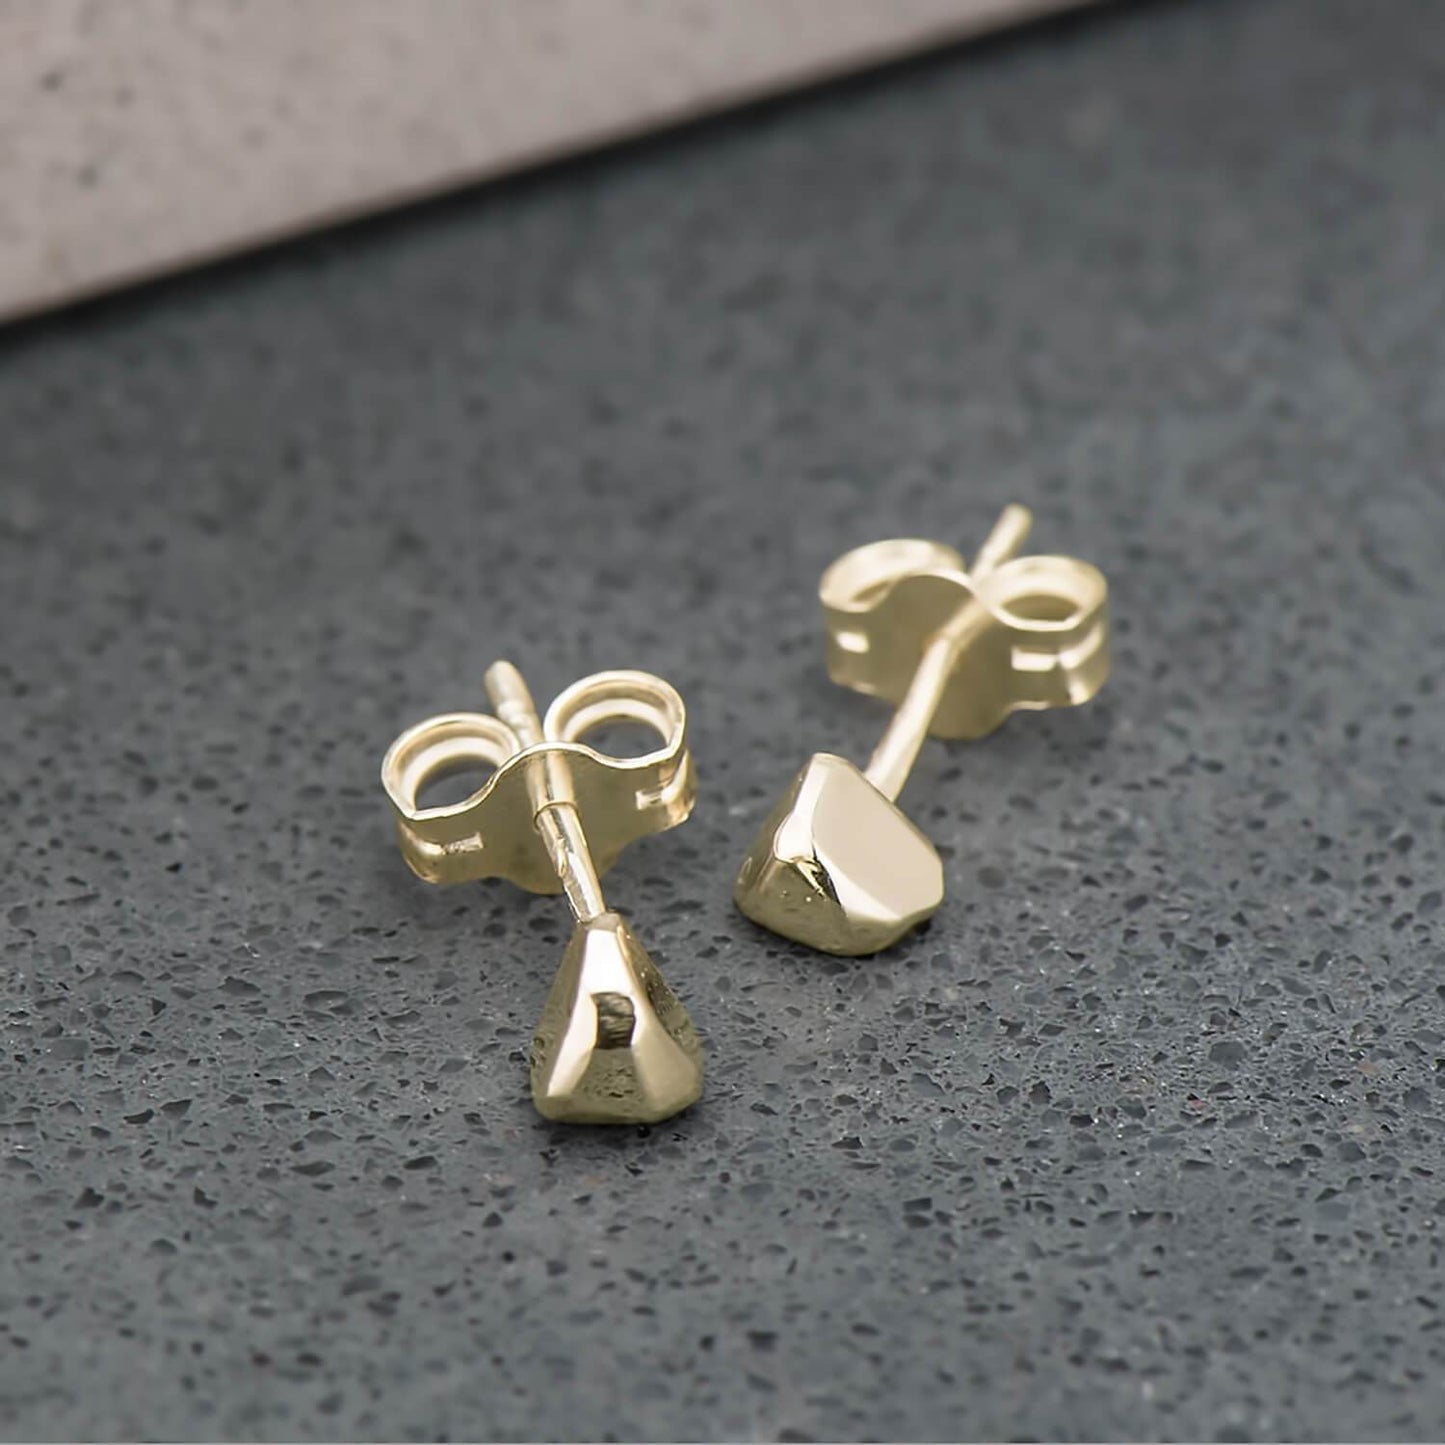 Recycled 10 karat yellow gold studs, shaped like triangles and highly polished.